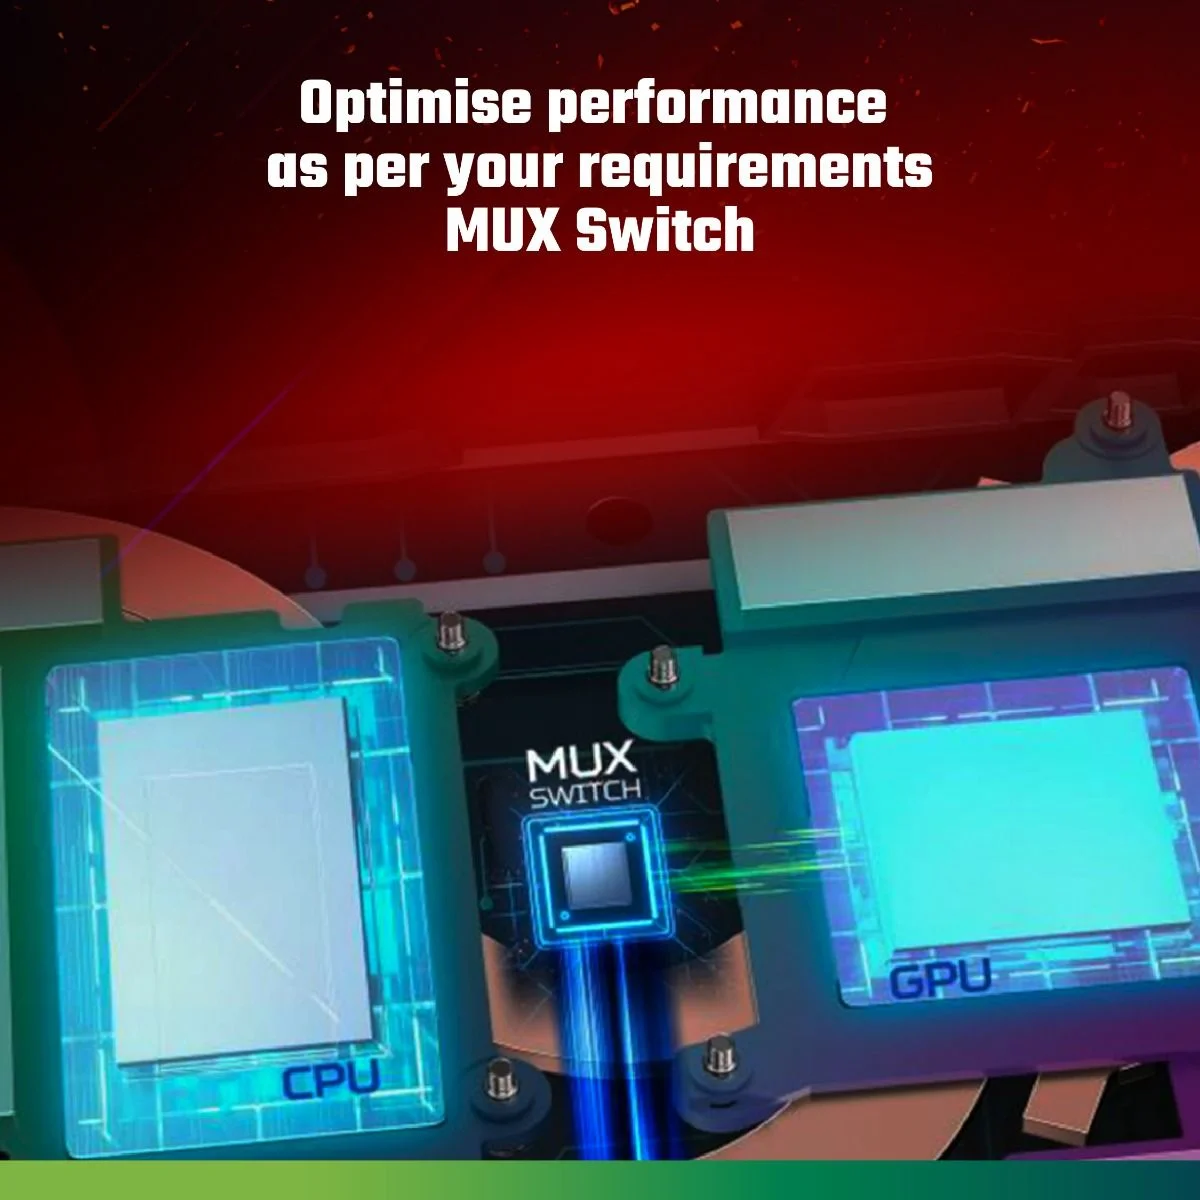 ACER NITRO 5 AMD MUX ON, MUX OFF1 With the included MUX switch technology you can disable the integrated graphics for an increase in performance in games at the expense of battery life.